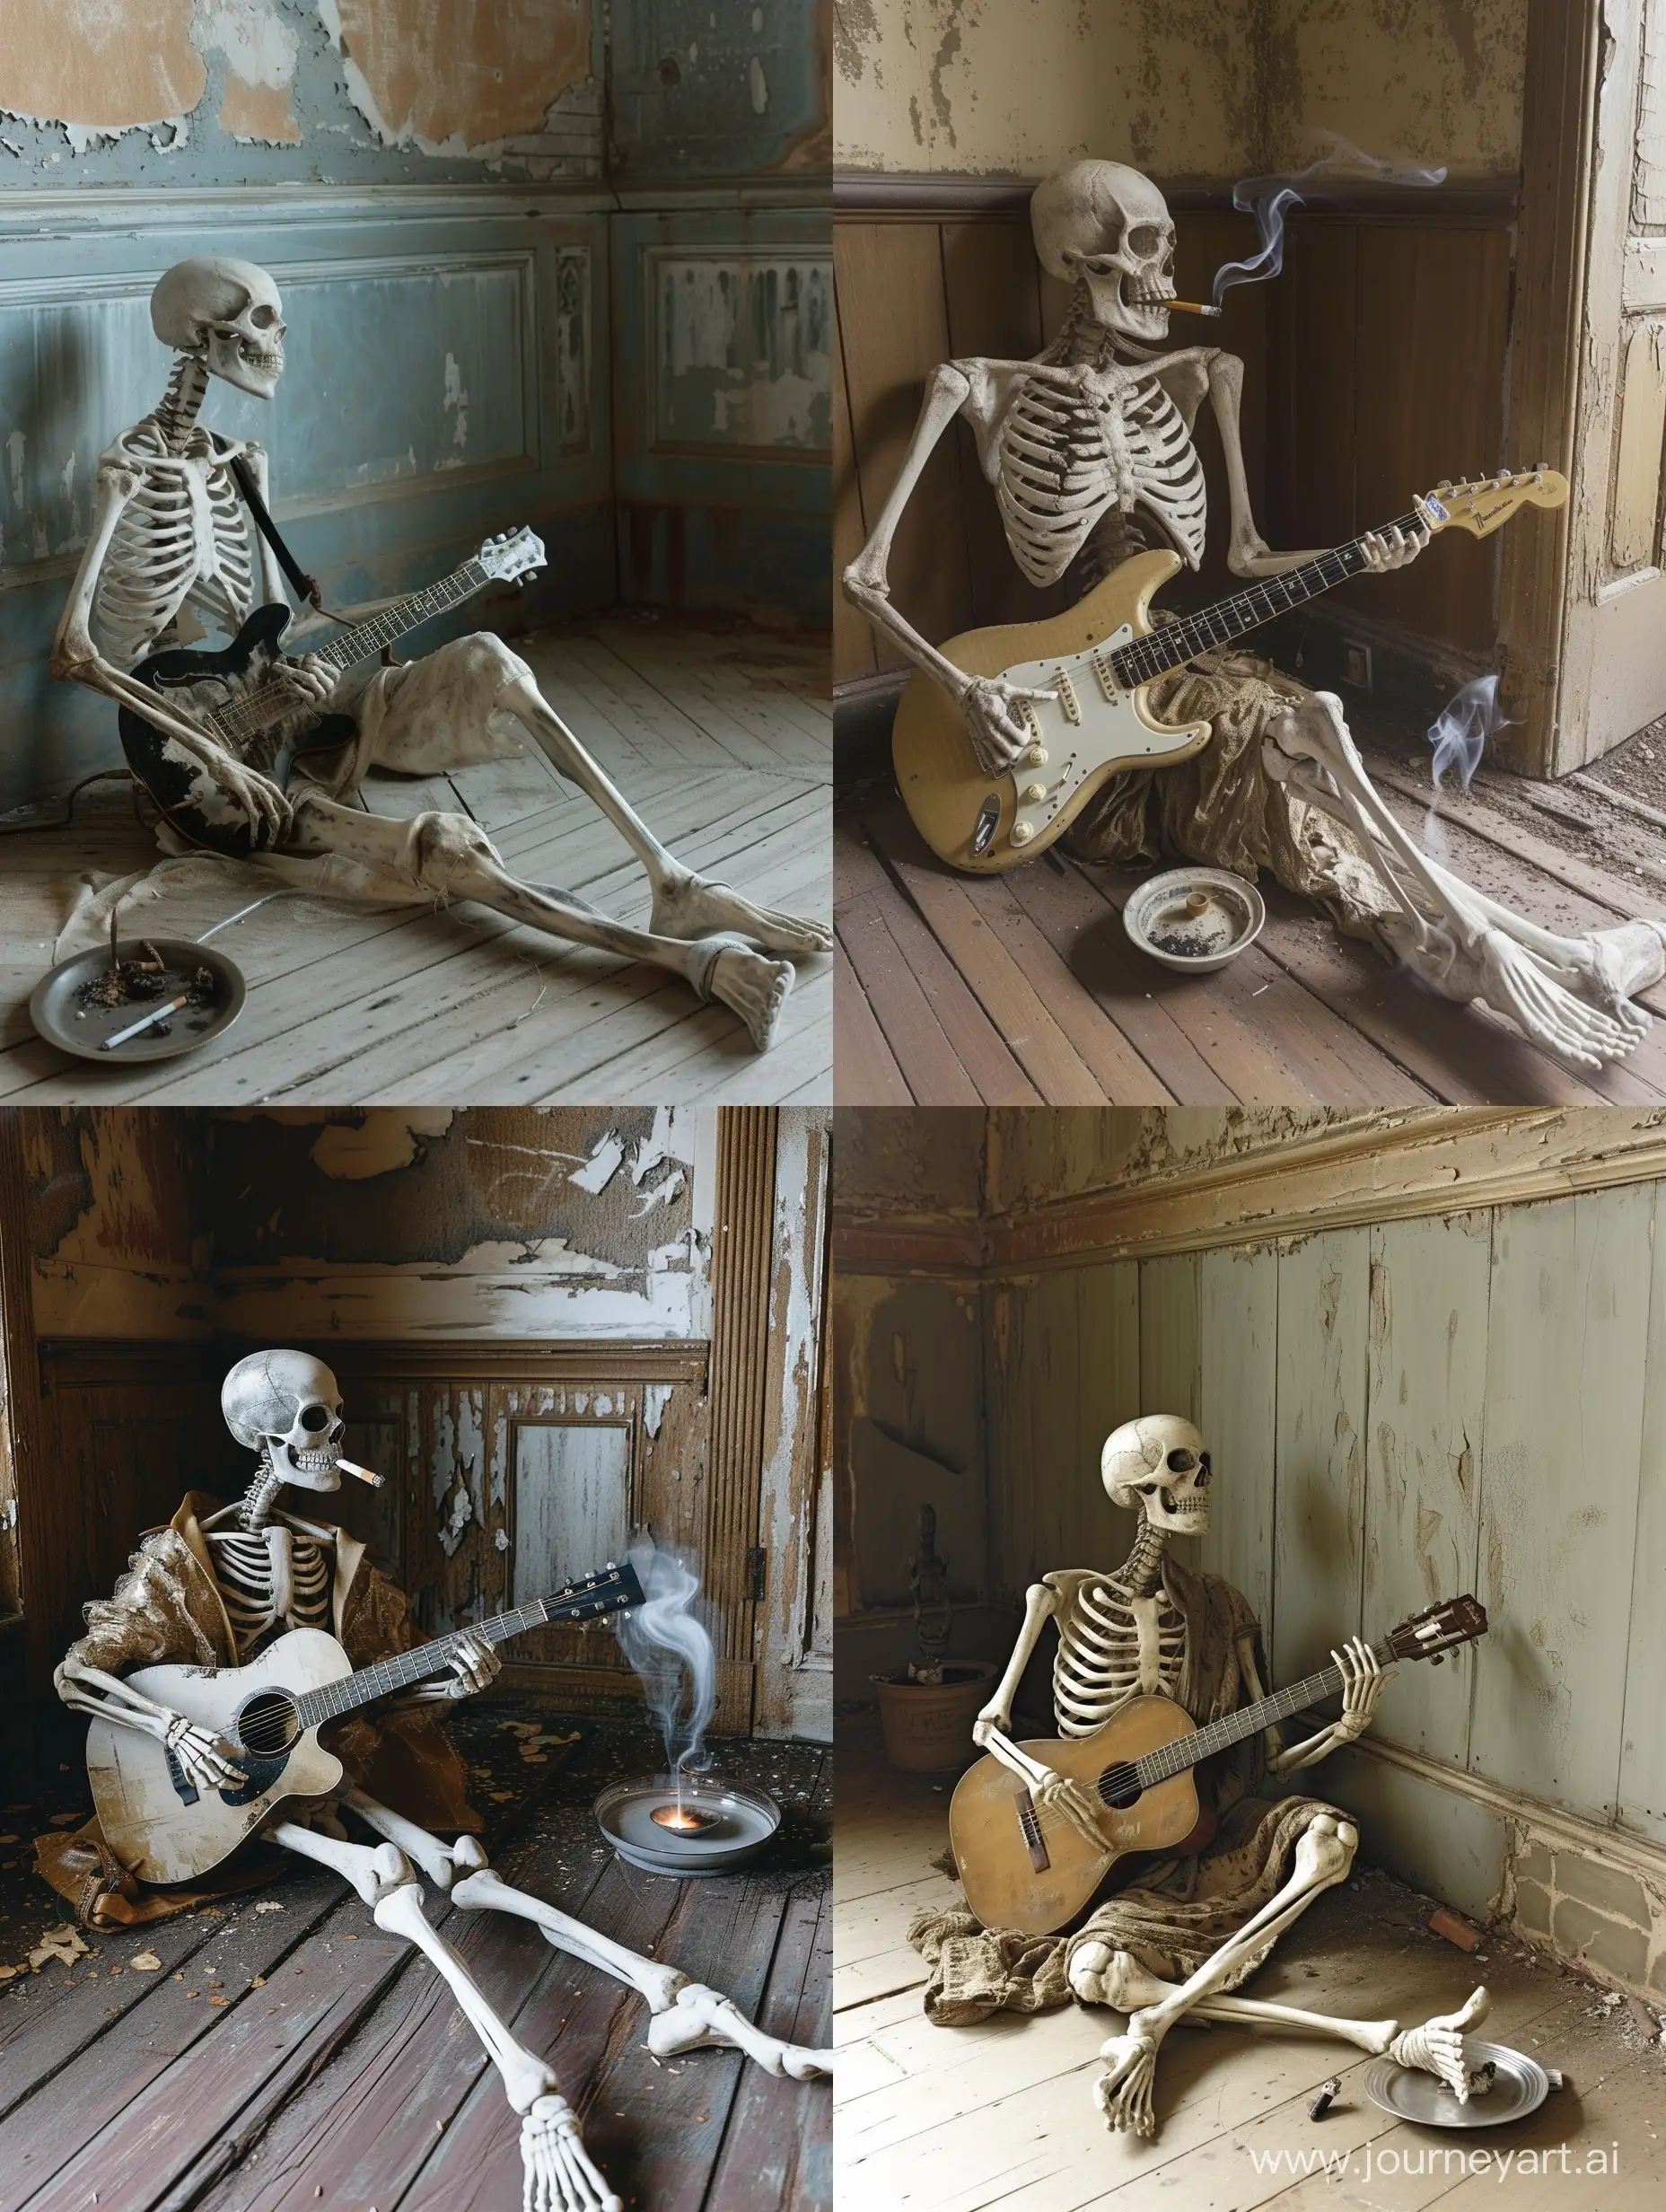 Saturated photo of a skeletal figure,
sitting on the worn-out floor of a run-down house.

The walls and wooden floor bear traces of old paint,
most of it chipped off, revealing the passage of time.

His legs are crossed Indian style and he’s wearing grunge clothes .

In his bony fingers, he holds a guitar,
strumming the strings with an ethereal melody,
filling the dilapidated space with haunting music.

Beside him, an ashtray holds a burning cigarette,
its smoke intertwining with the air,
creating an atmosphere of nostalgia and introspection.

This image captures the essence of raw emotions,
the juxtaposition of decay and creativity,
inviting viewers into the world of forgotten dreams,
where music serves as a balm for the weary soul.

Unlikely collaborators:
Kurt Cobain, the iconic grunge musician,
David Lynch, the filmmaker known for surreal and atmospheric storytelling,
Anton Corbijn, the photographer capturing the essence of music and subcultures,
Sarah Burton, the fashion designer blending darkness and romanticism,
Tarsem Singh, the director known for his visually stunning and symbolic films. 